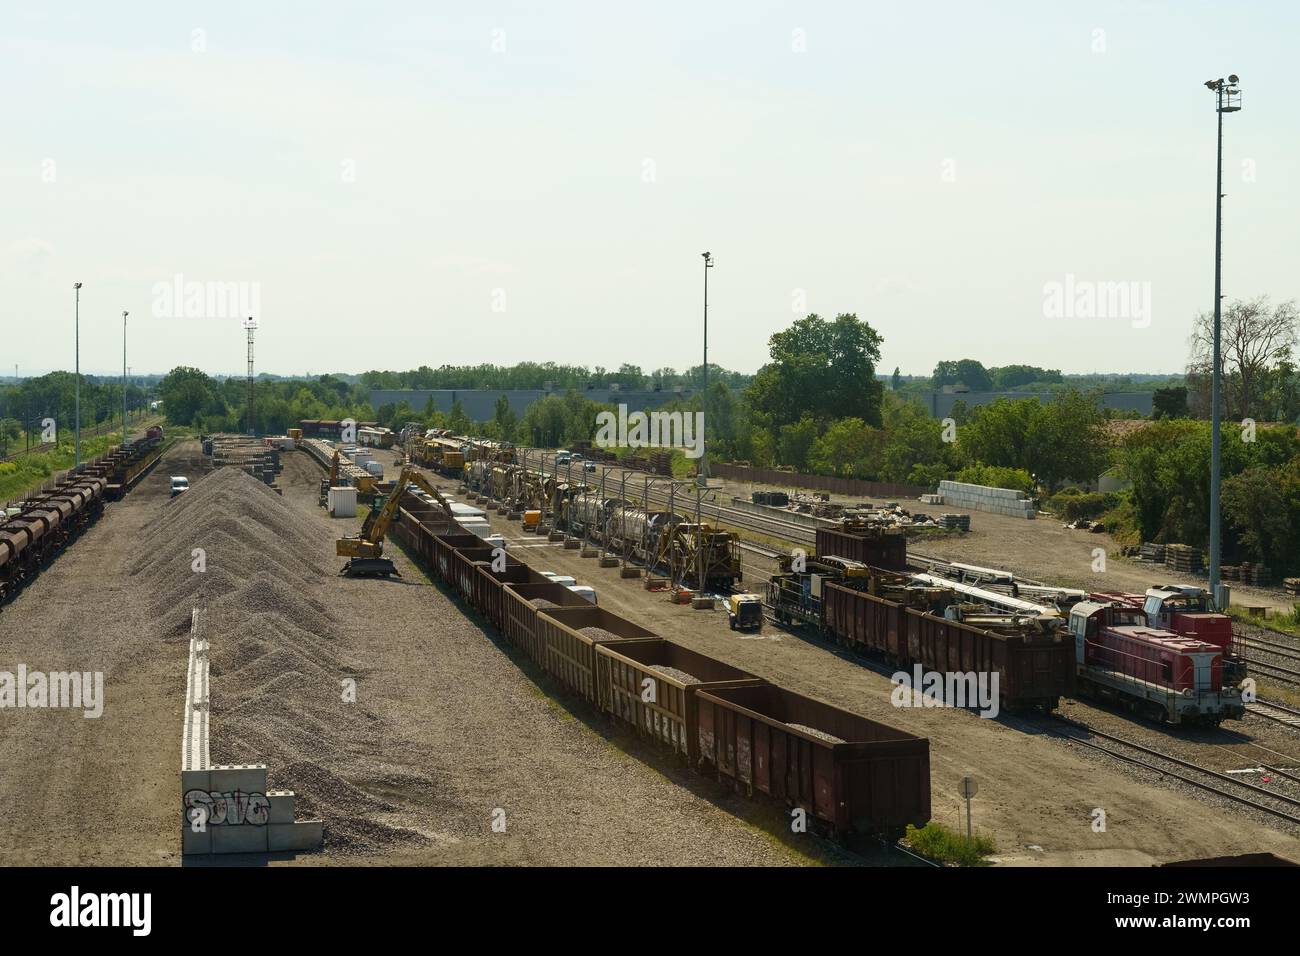 Lyon, France - May 16, 2023: Multiple rows of freight trains are loaded with various goods at a sprawling train yard. The day is clear and sunny, show Stock Photo